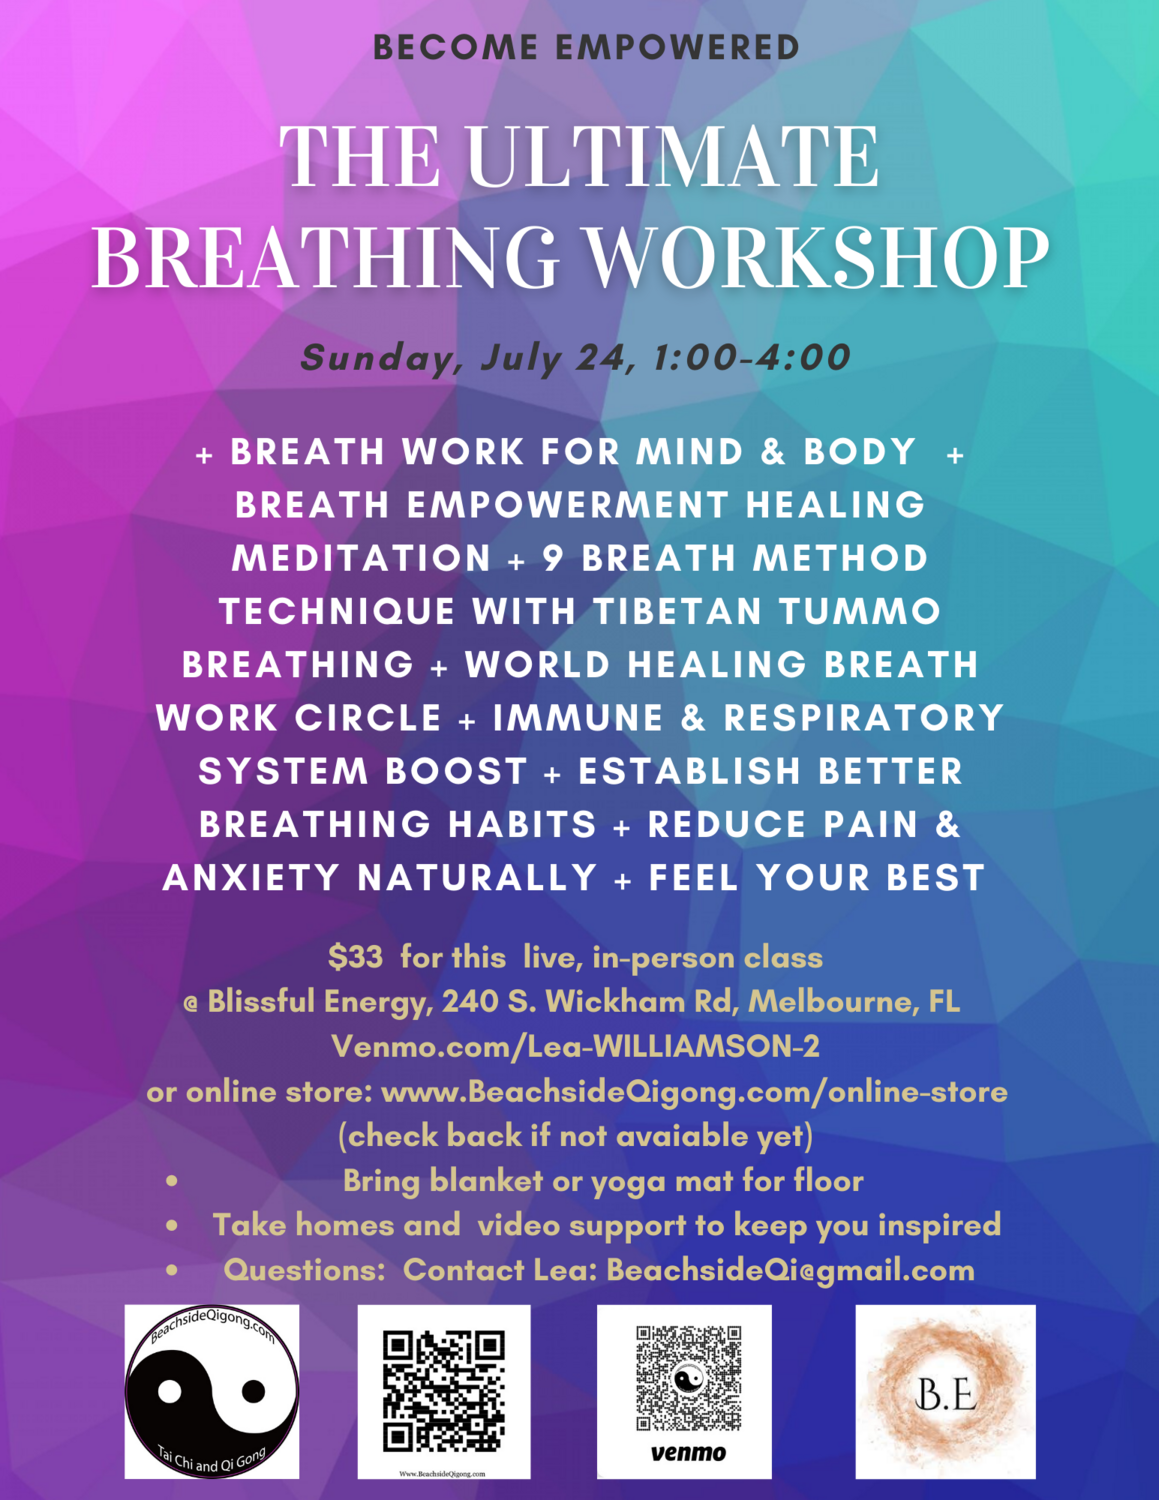 SOLD OUT-The Ultimate Breathing Workshop